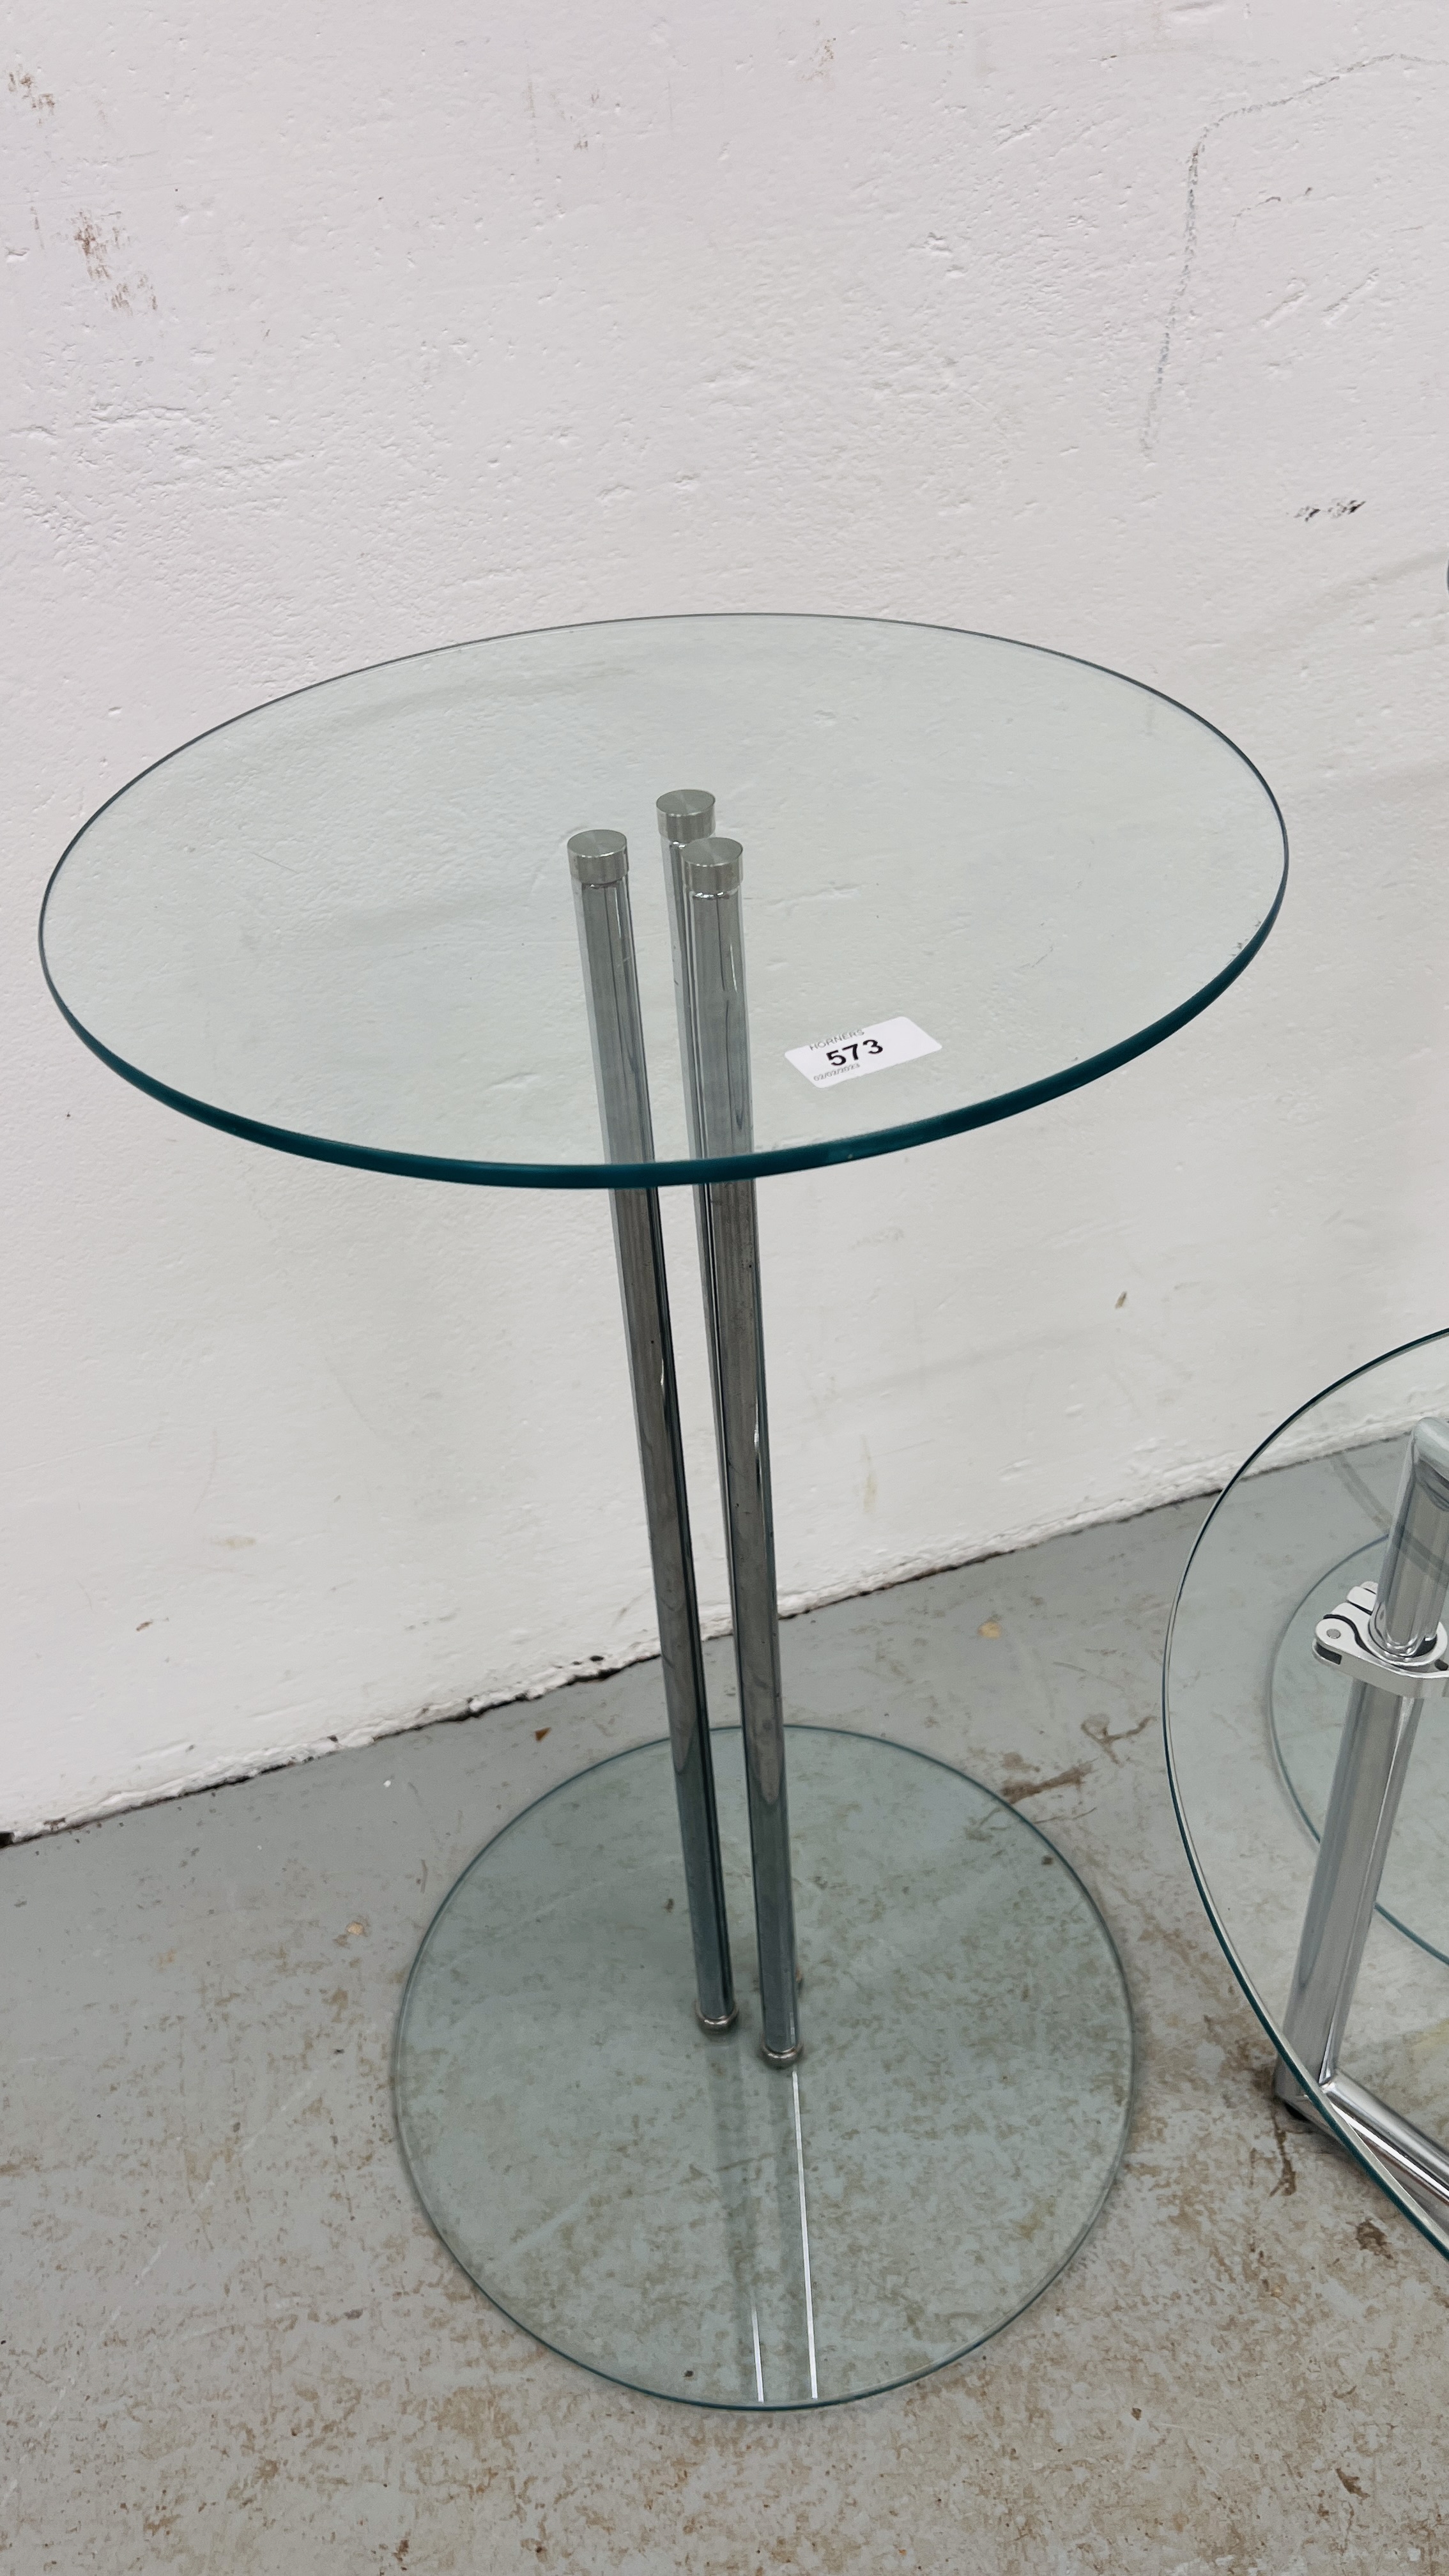 3 X DESIGNER GLASS AND CHROME OCCASIONAL TABLE. - Image 5 of 6